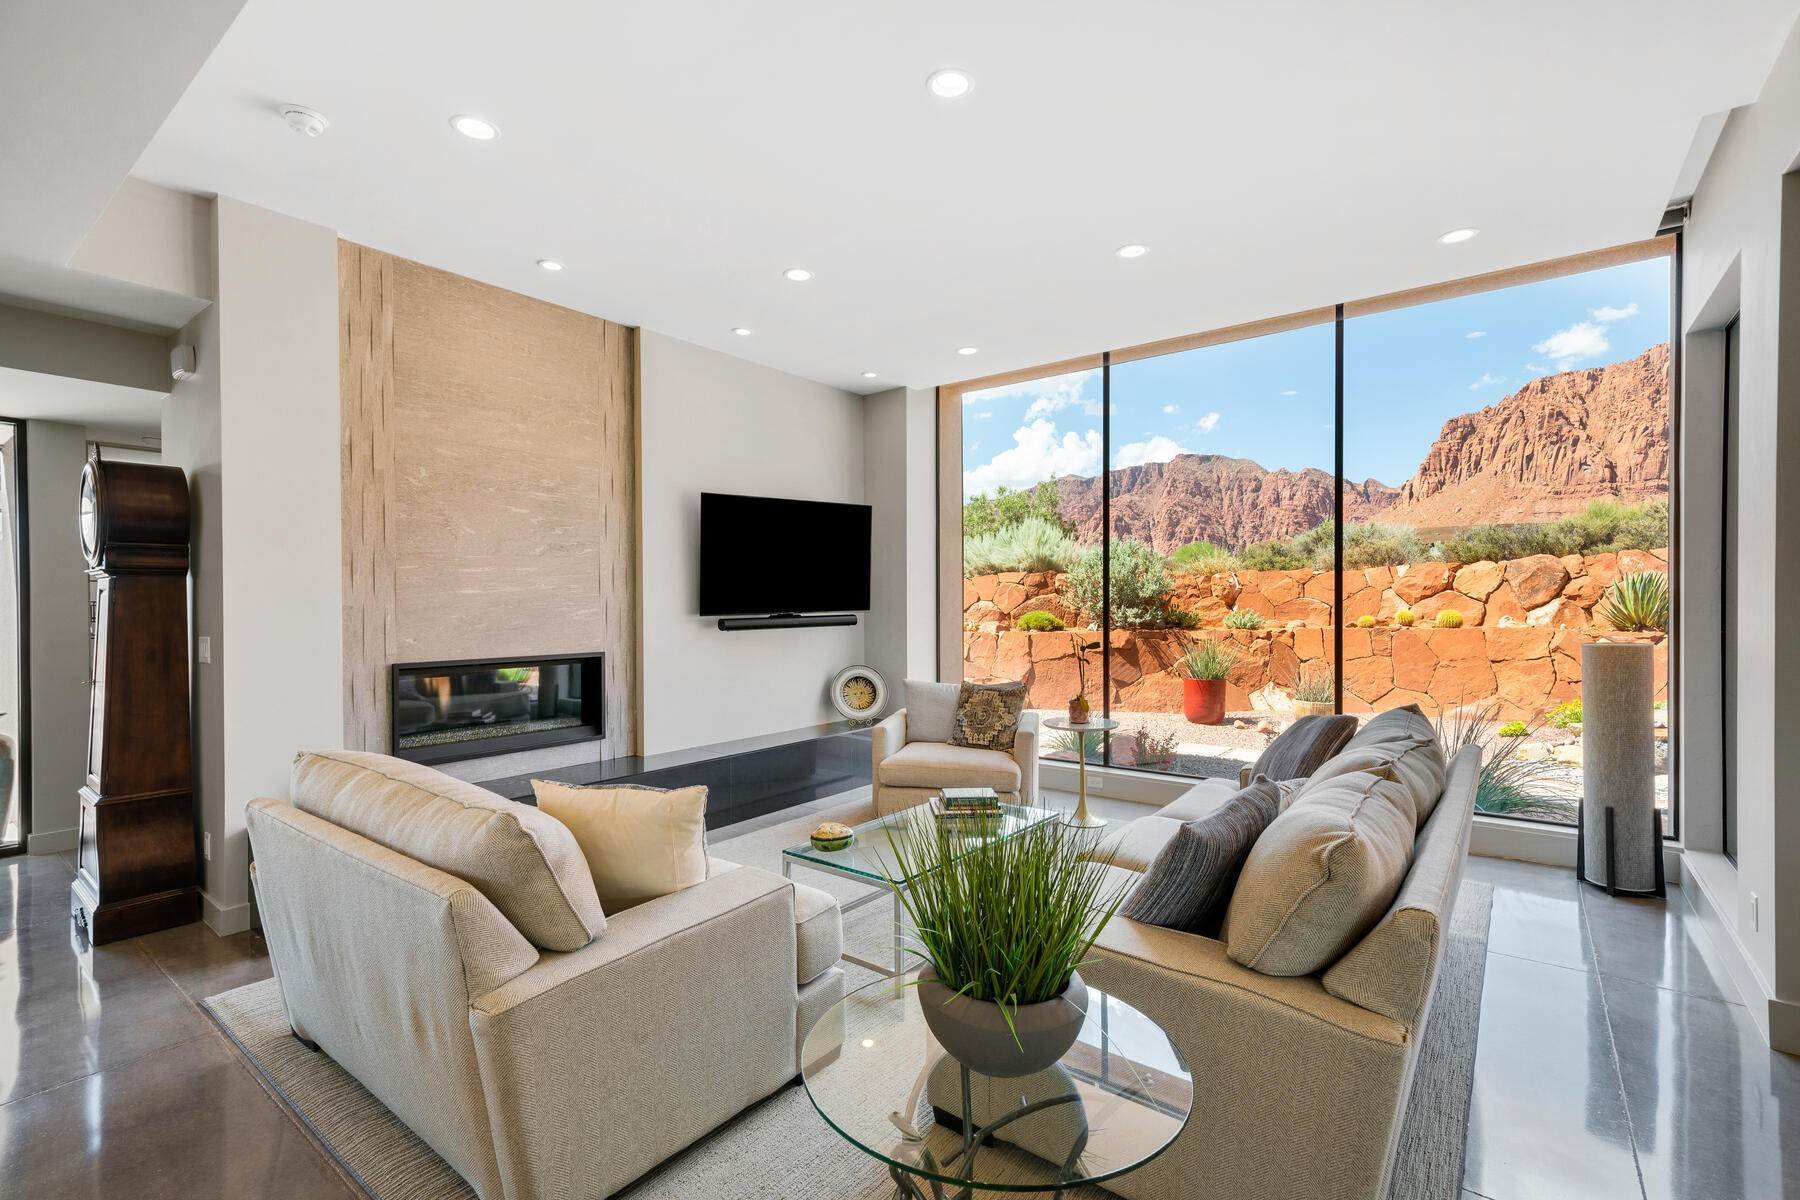 Single Family Homes for Sale at Spectacular Kayenta Views 579 W Paiute Drive Ivins, Utah 84738 United States